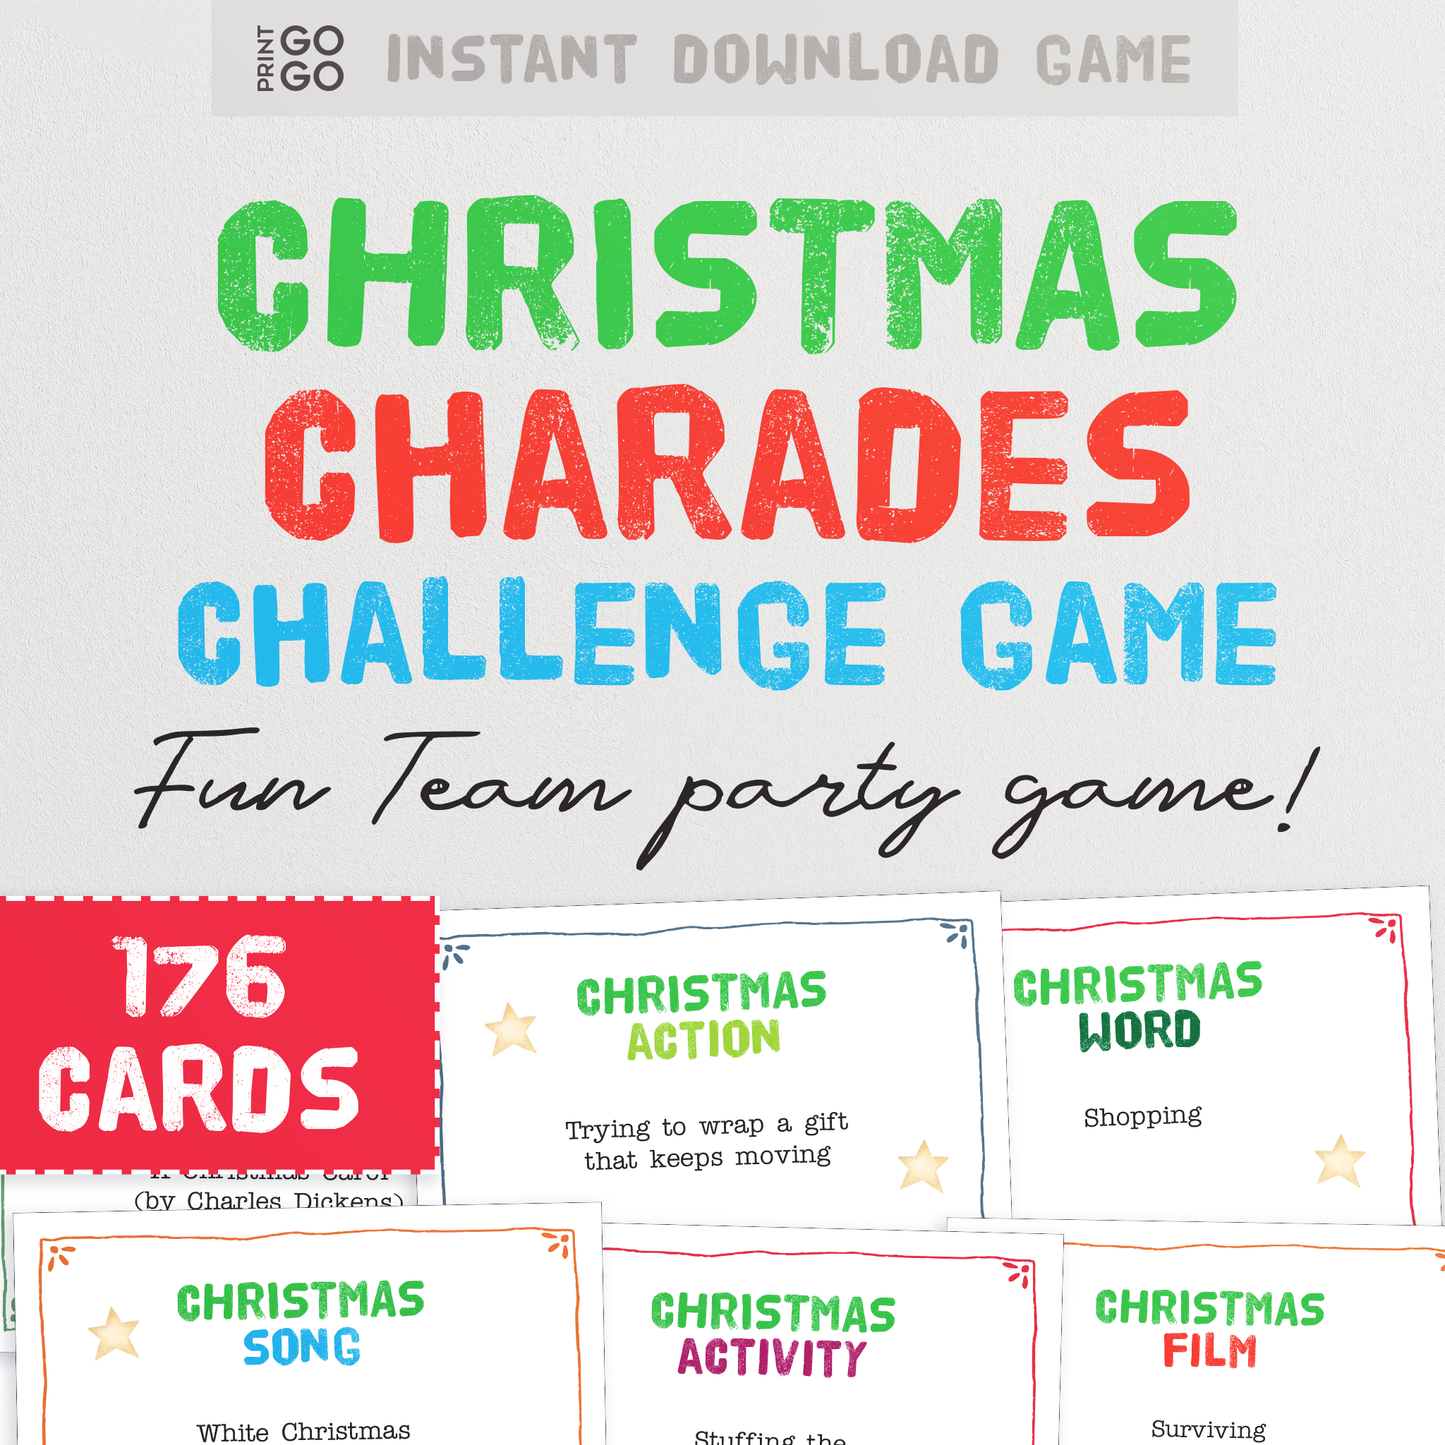 Christmas Charades Challenge Game - The Hilarious Family Party Game of Acting Out | Printable Christmas Group Game | Xmas Office Party Game